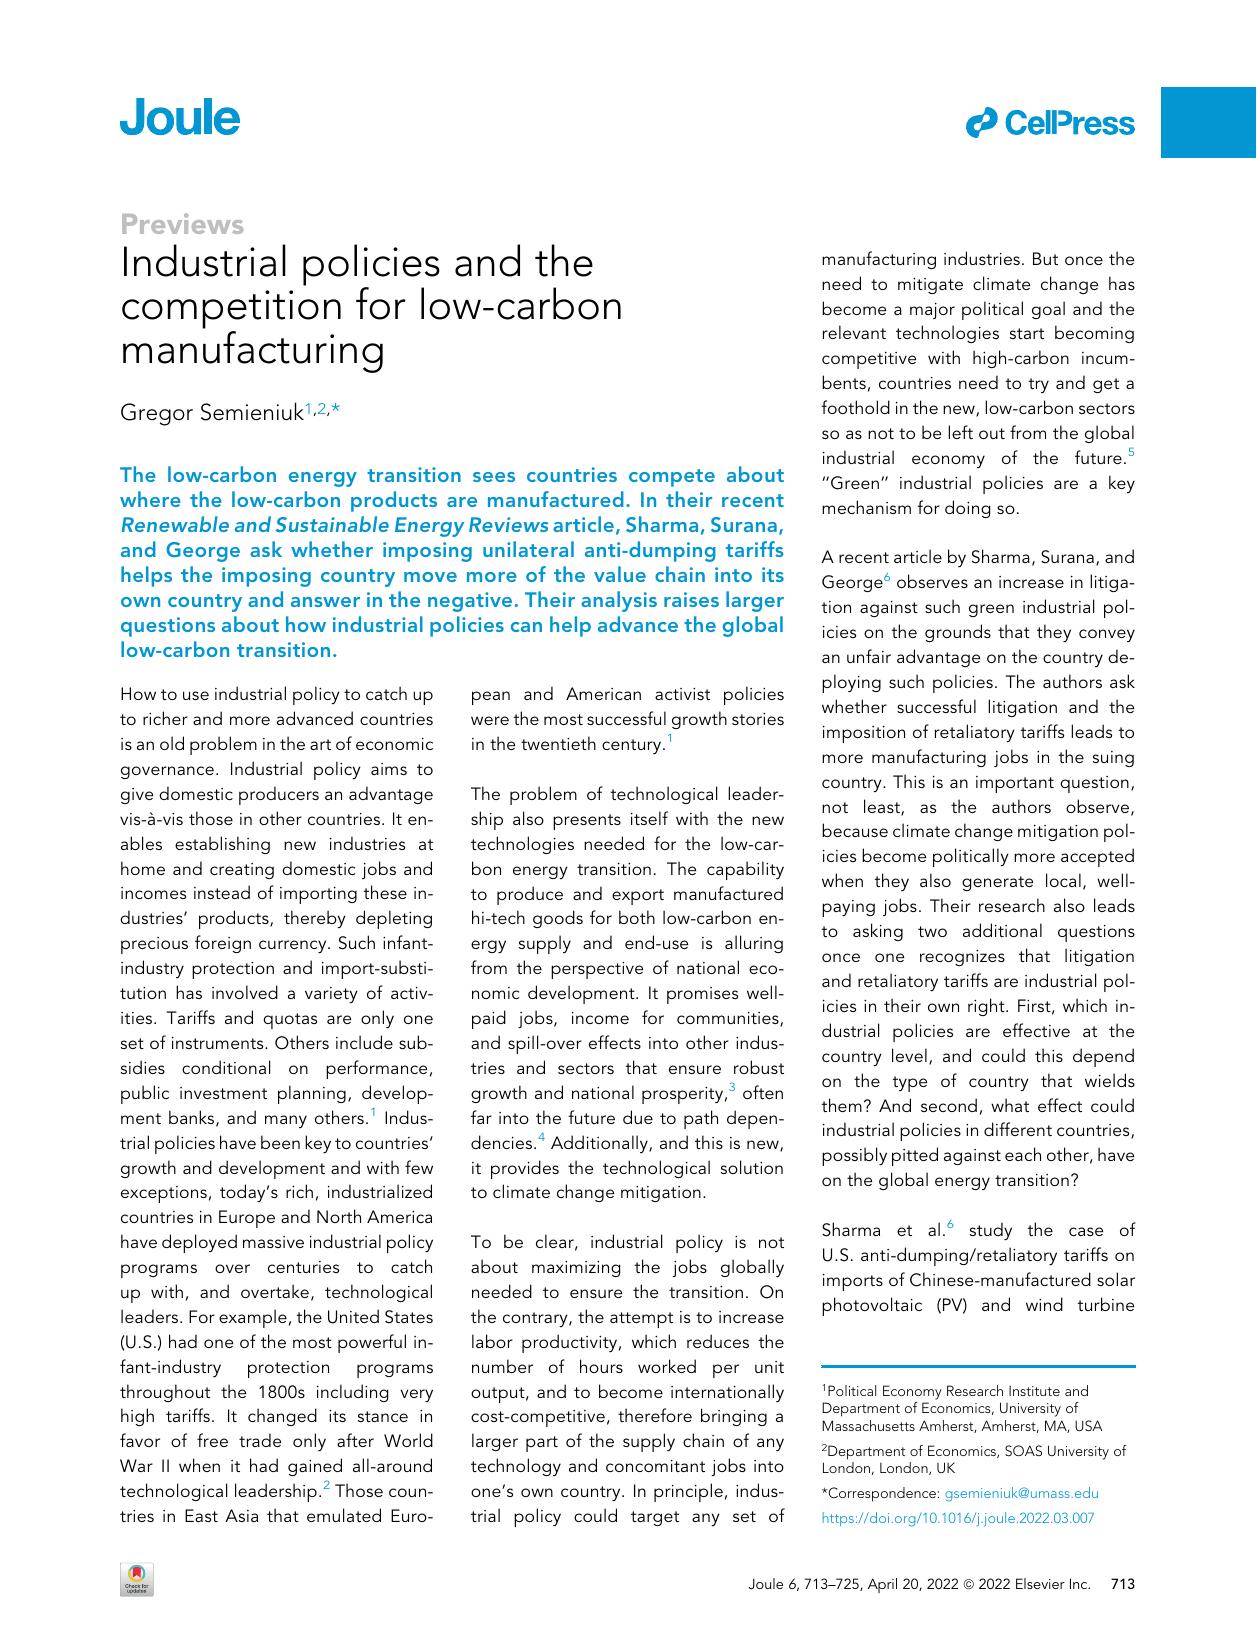 Industrial policies and the competition for low-carbon manufacturing by Gregor Semieniuk